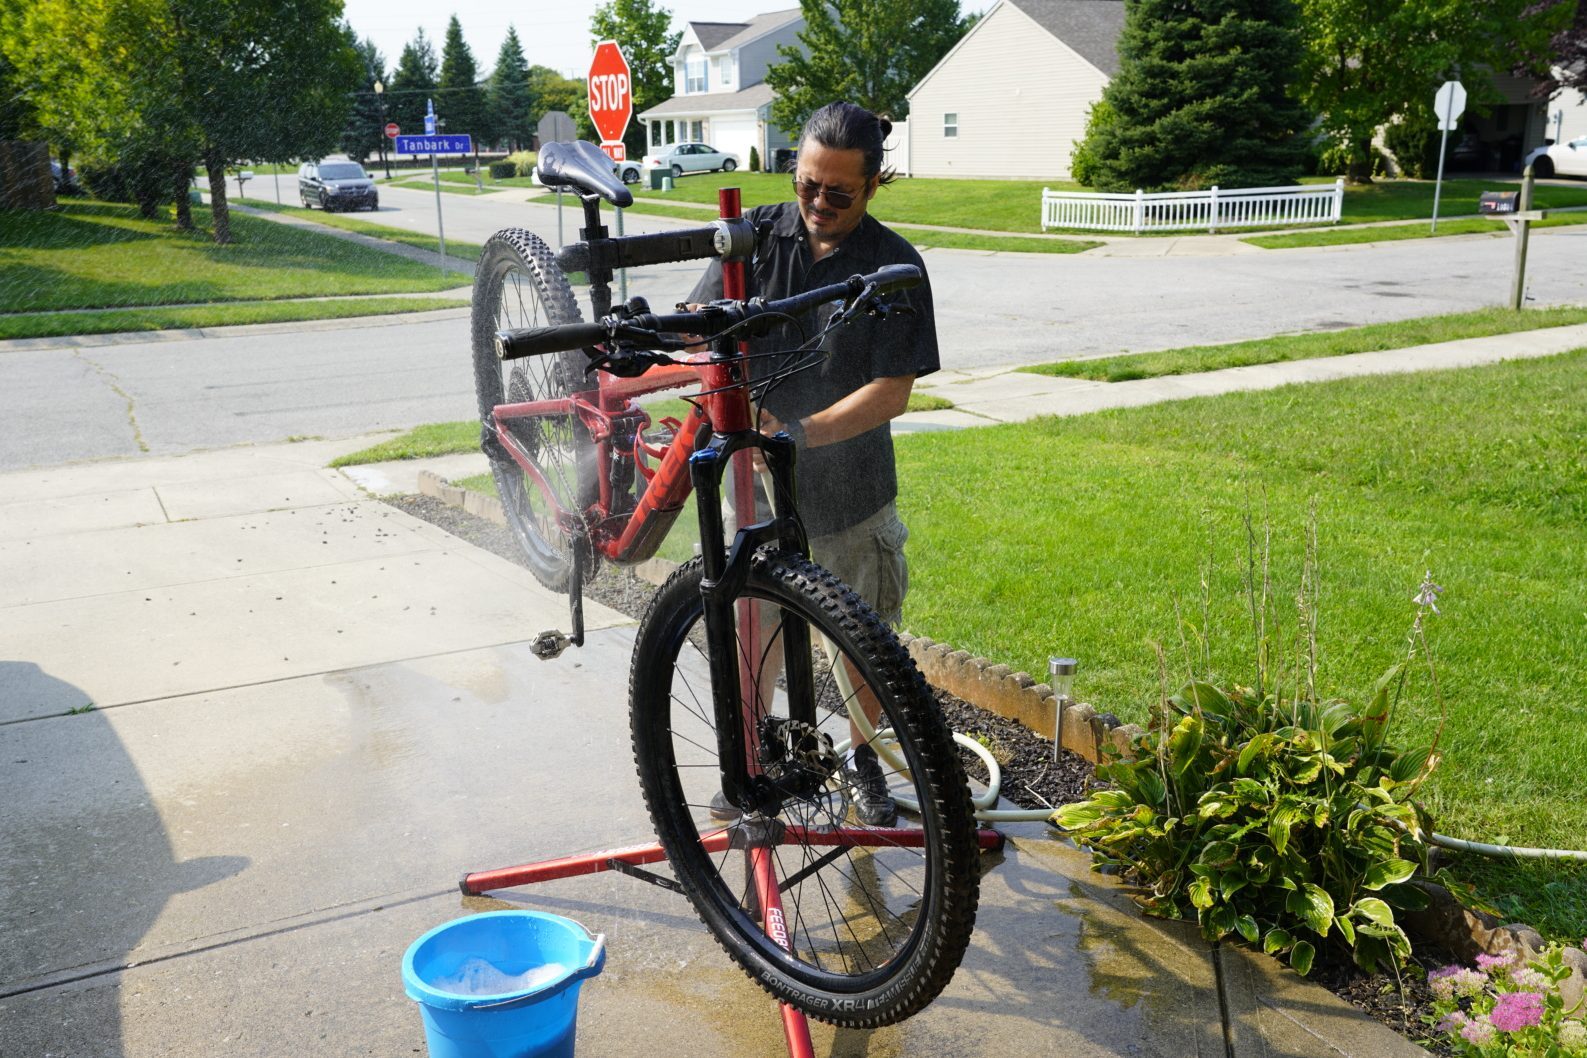 man cleaning his bike with a hose in the driveway